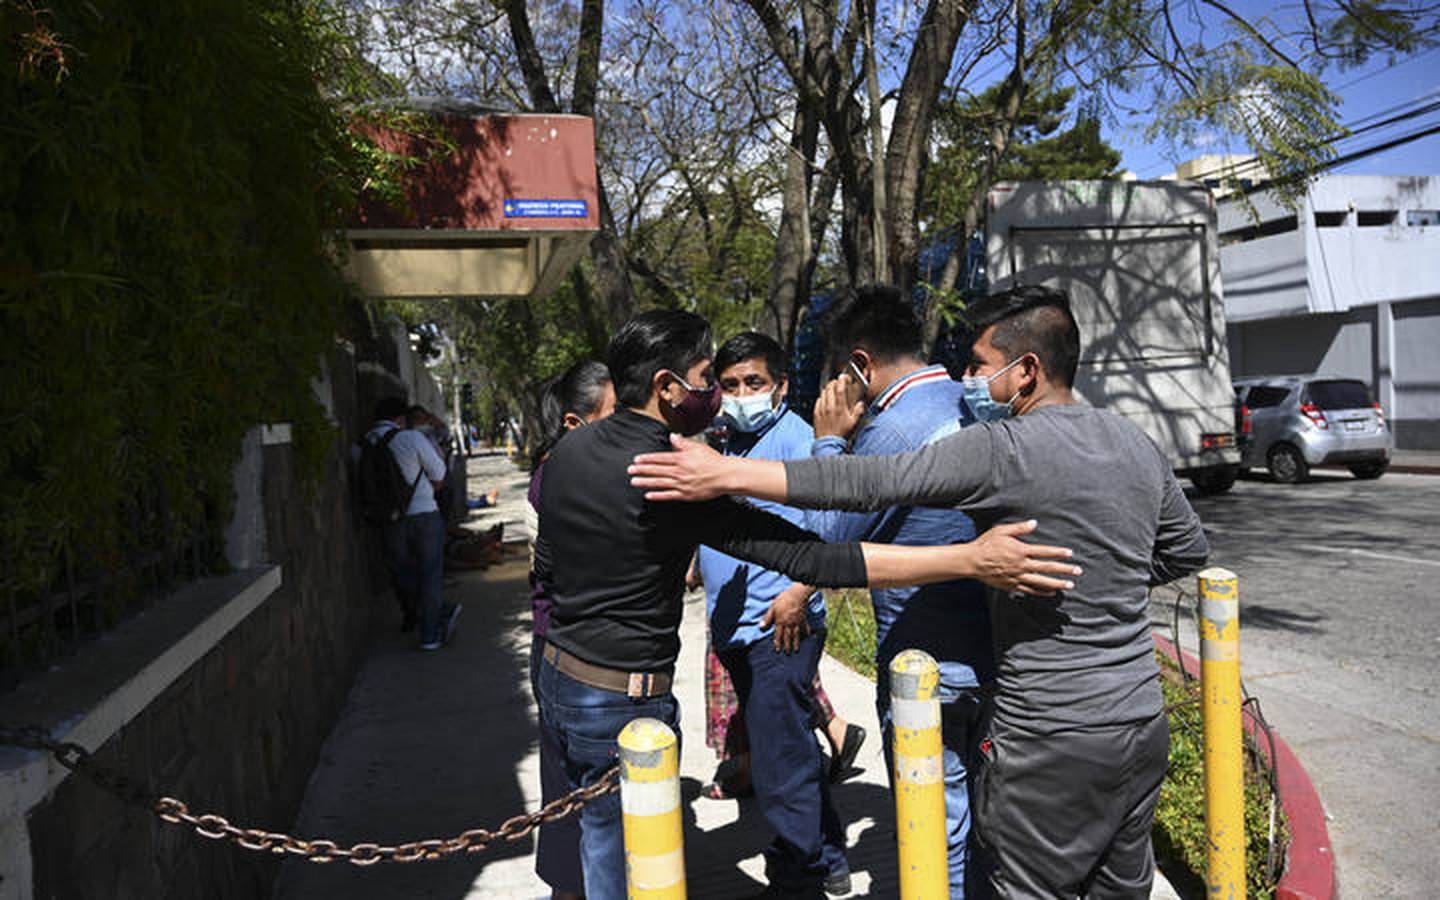 People remain outside the Ministry of Foreign Affairs in Guatemala City on January 25, 2021, after giving details of their relatives who might be in the group among people found burned to death on a rural road in the state of Tamaulipas, Mexico.